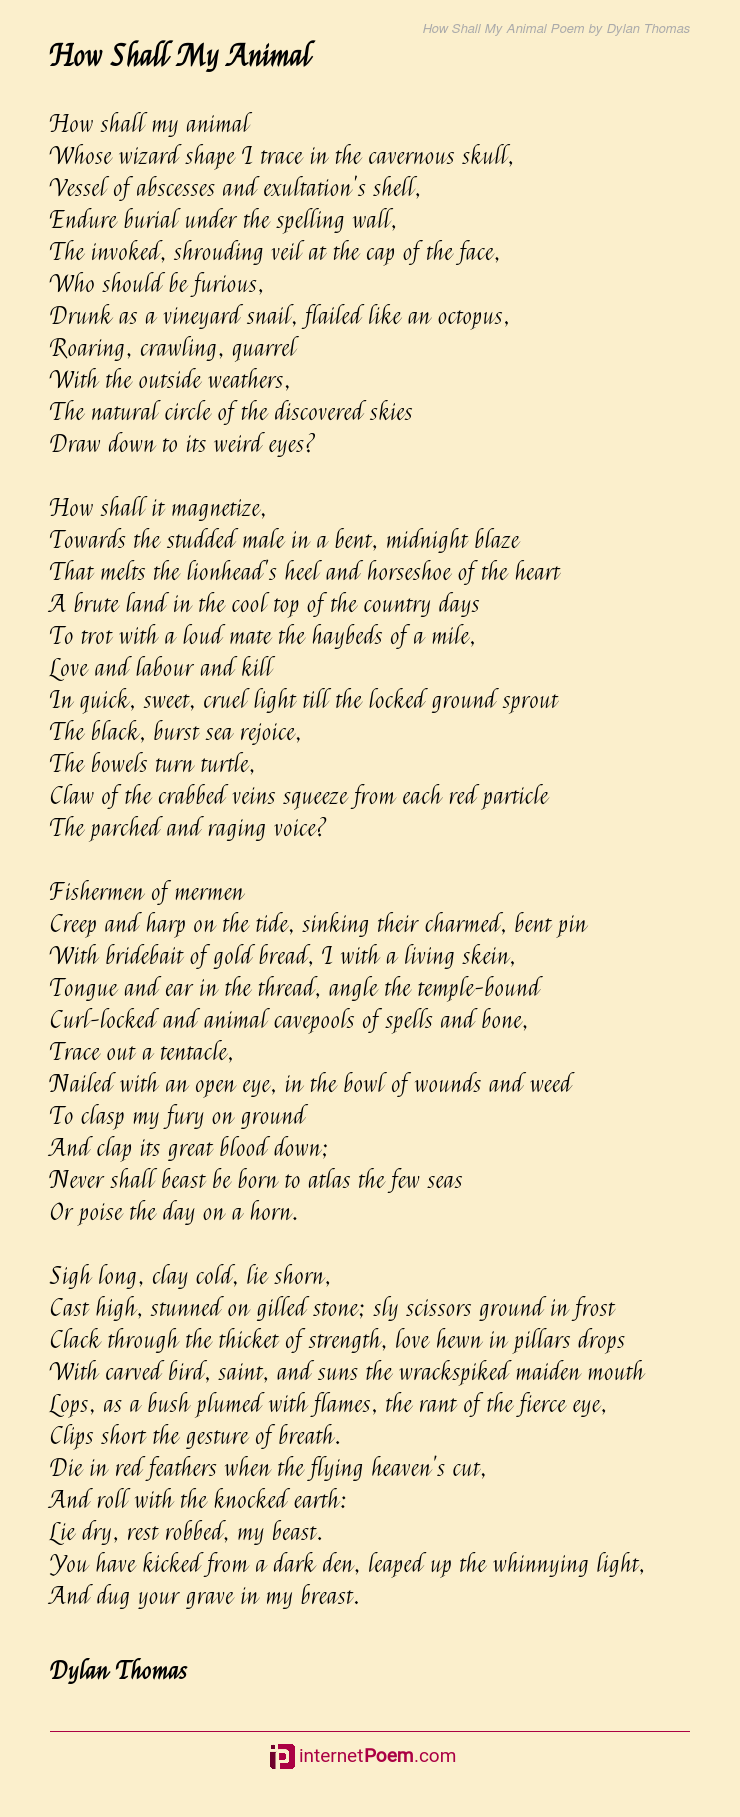 How Shall My Animal Poem by Dylan Thomas